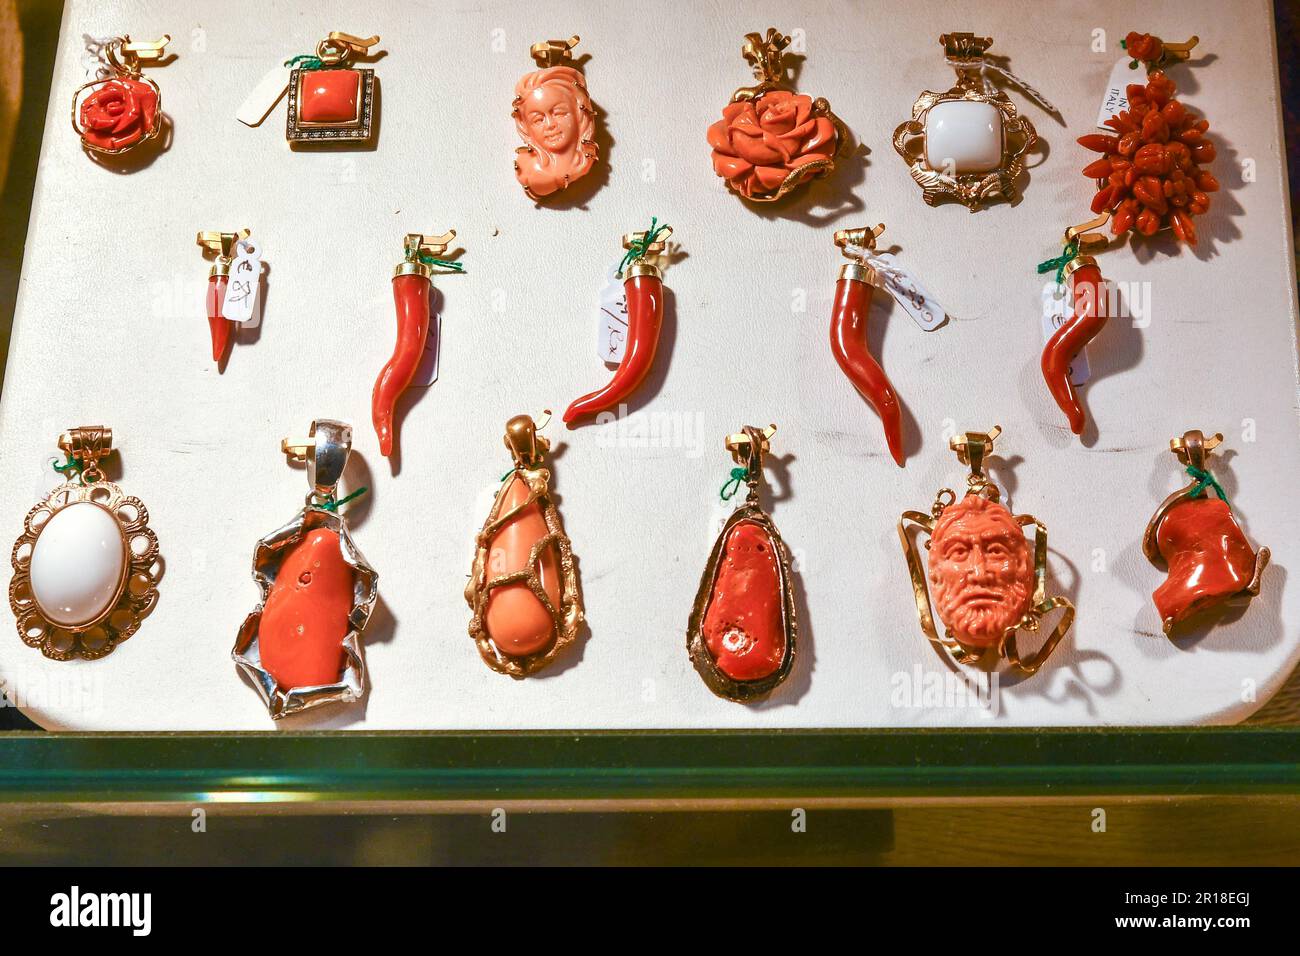 Close-up of a shop window of a jewelry store with coral and gold pendants and lucky horns on a white display, Venice, Veneto, Italy Stock Photo